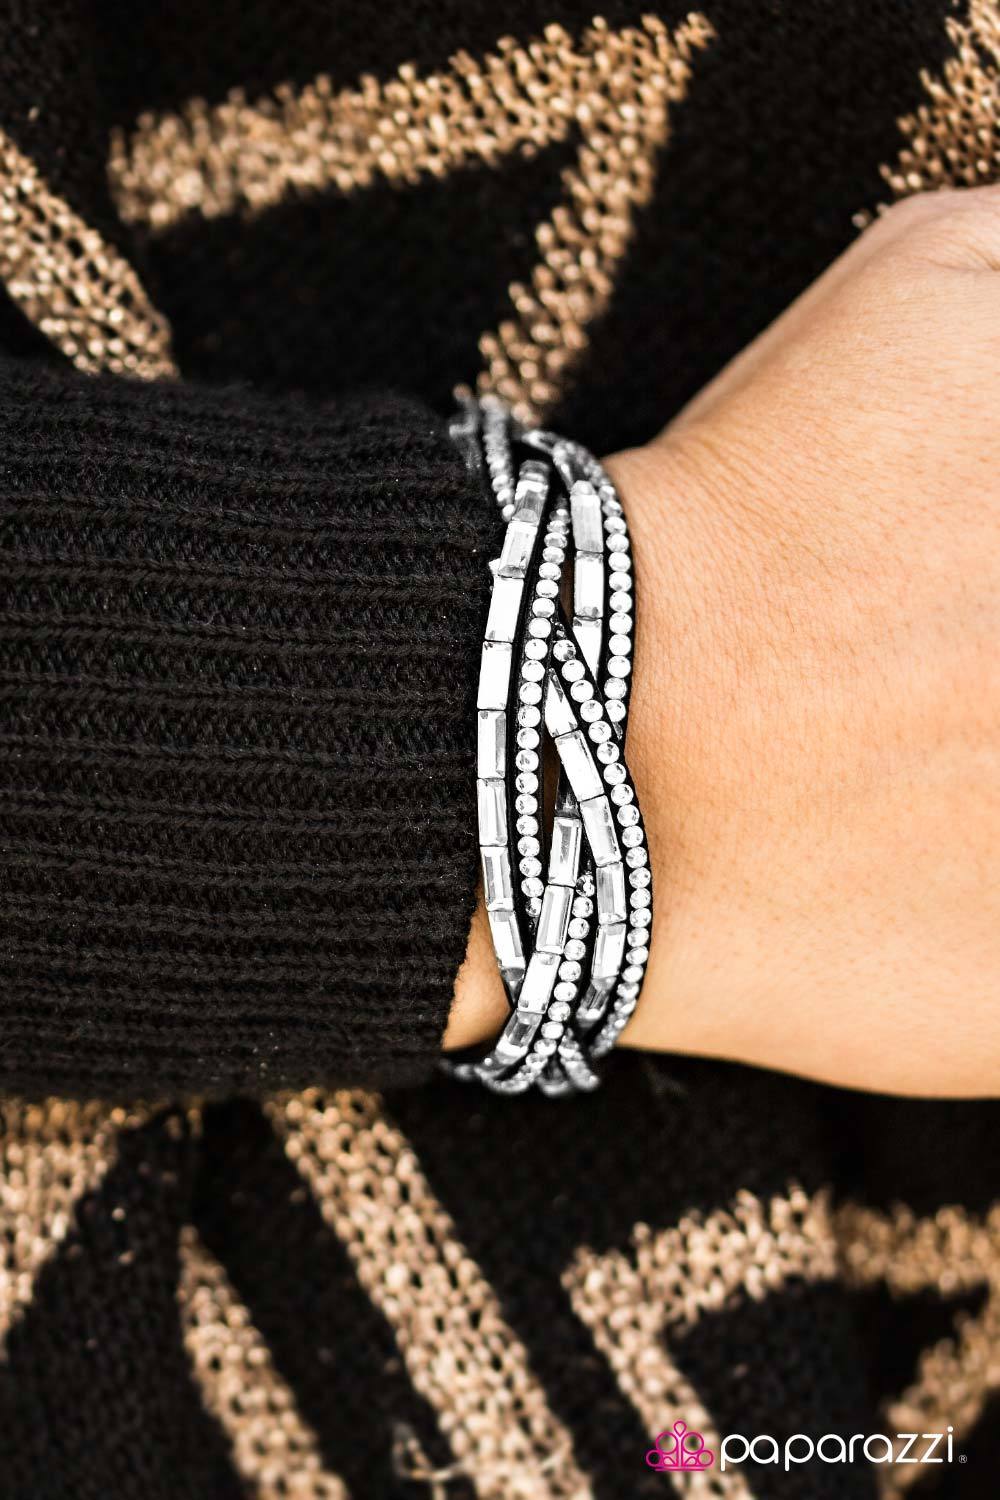 Too Cool for School Black and White Braided Urban Wrap Snap Bracelet - Paparazzi Accessories-CarasShop.com - $5 Jewelry by Cara Jewels